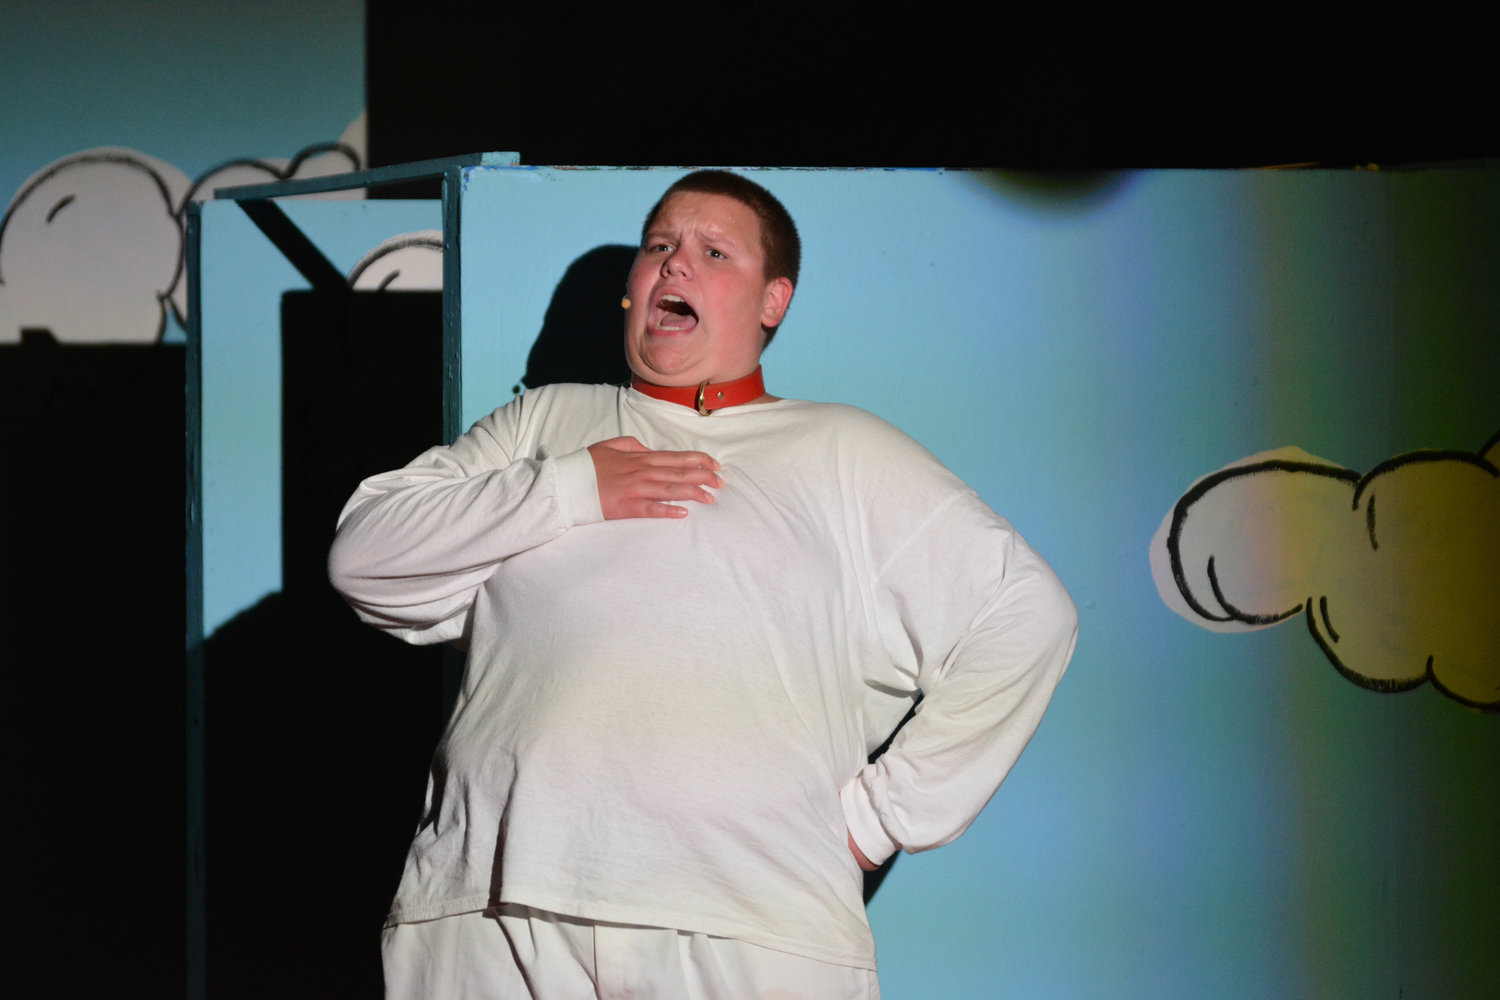 “Snoopy” made the most of his solo performance in the midst of the Tenino Young at Young’s play, “You’re a Good Man, Charlie Brown.”